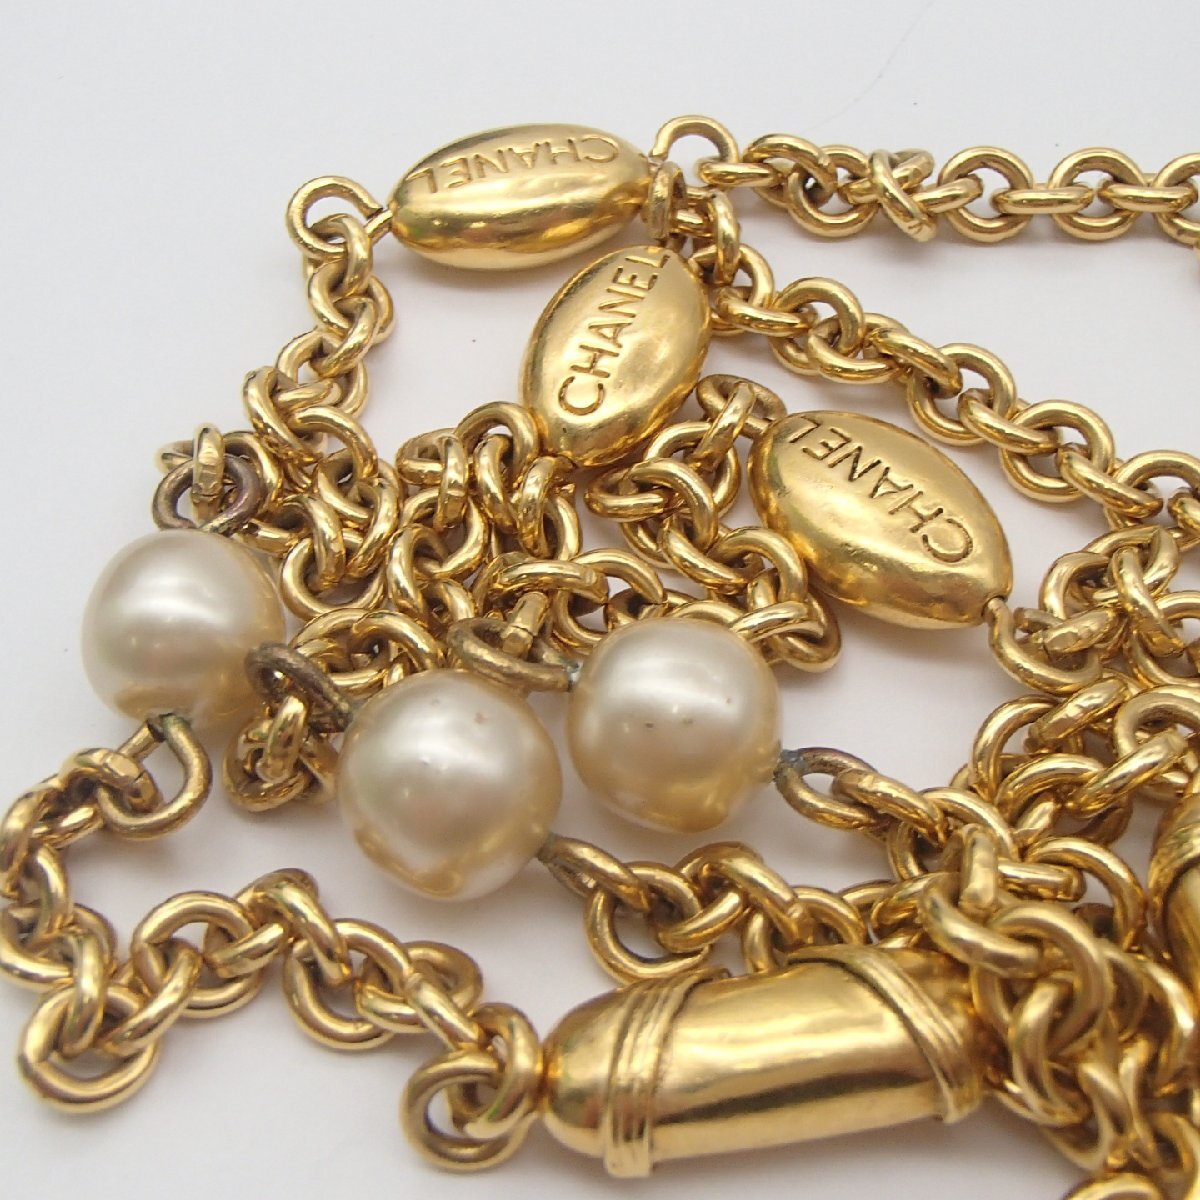 *CHANEL Chanel necklace / Vintage fake pearl here here Mark accessory box *KI